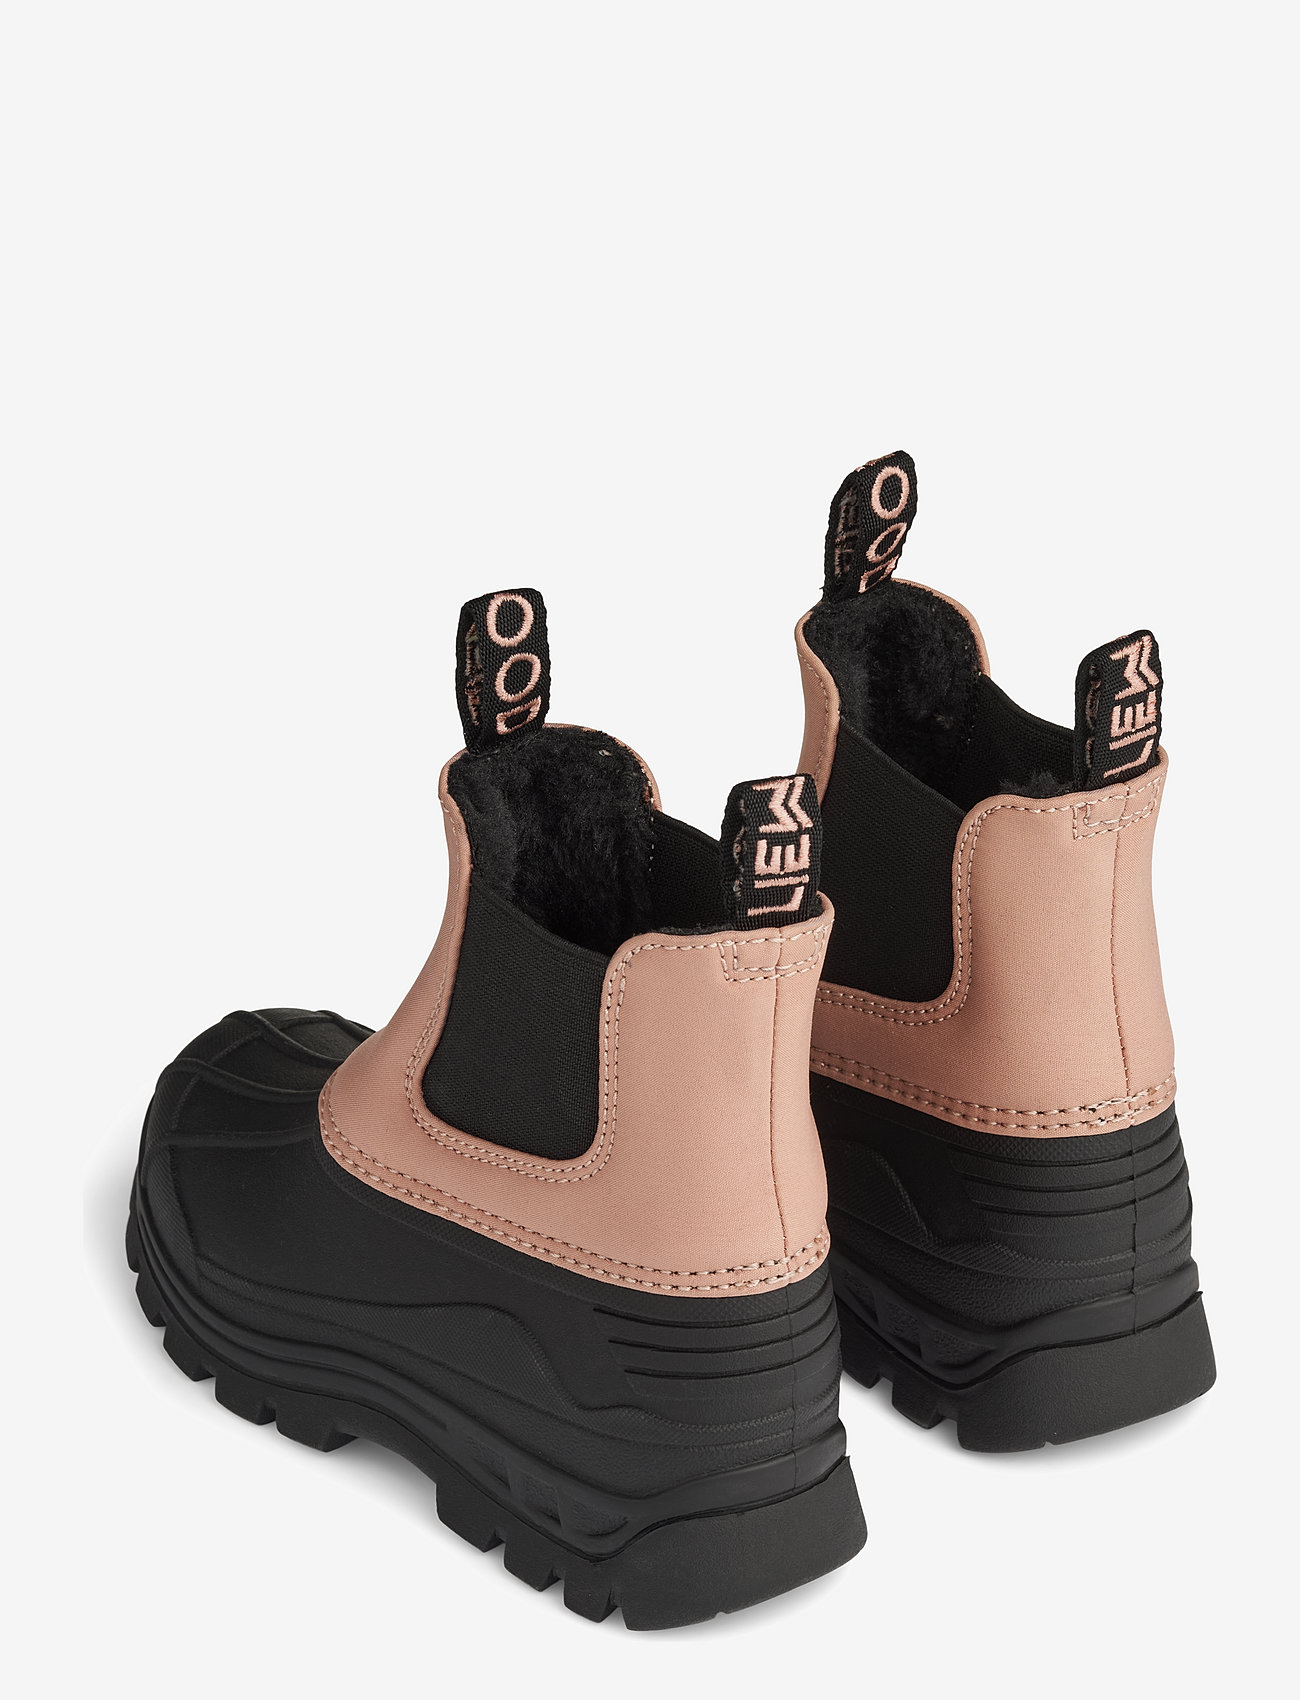 Liewood - Miky Boot - kids - tuscany rose - 1